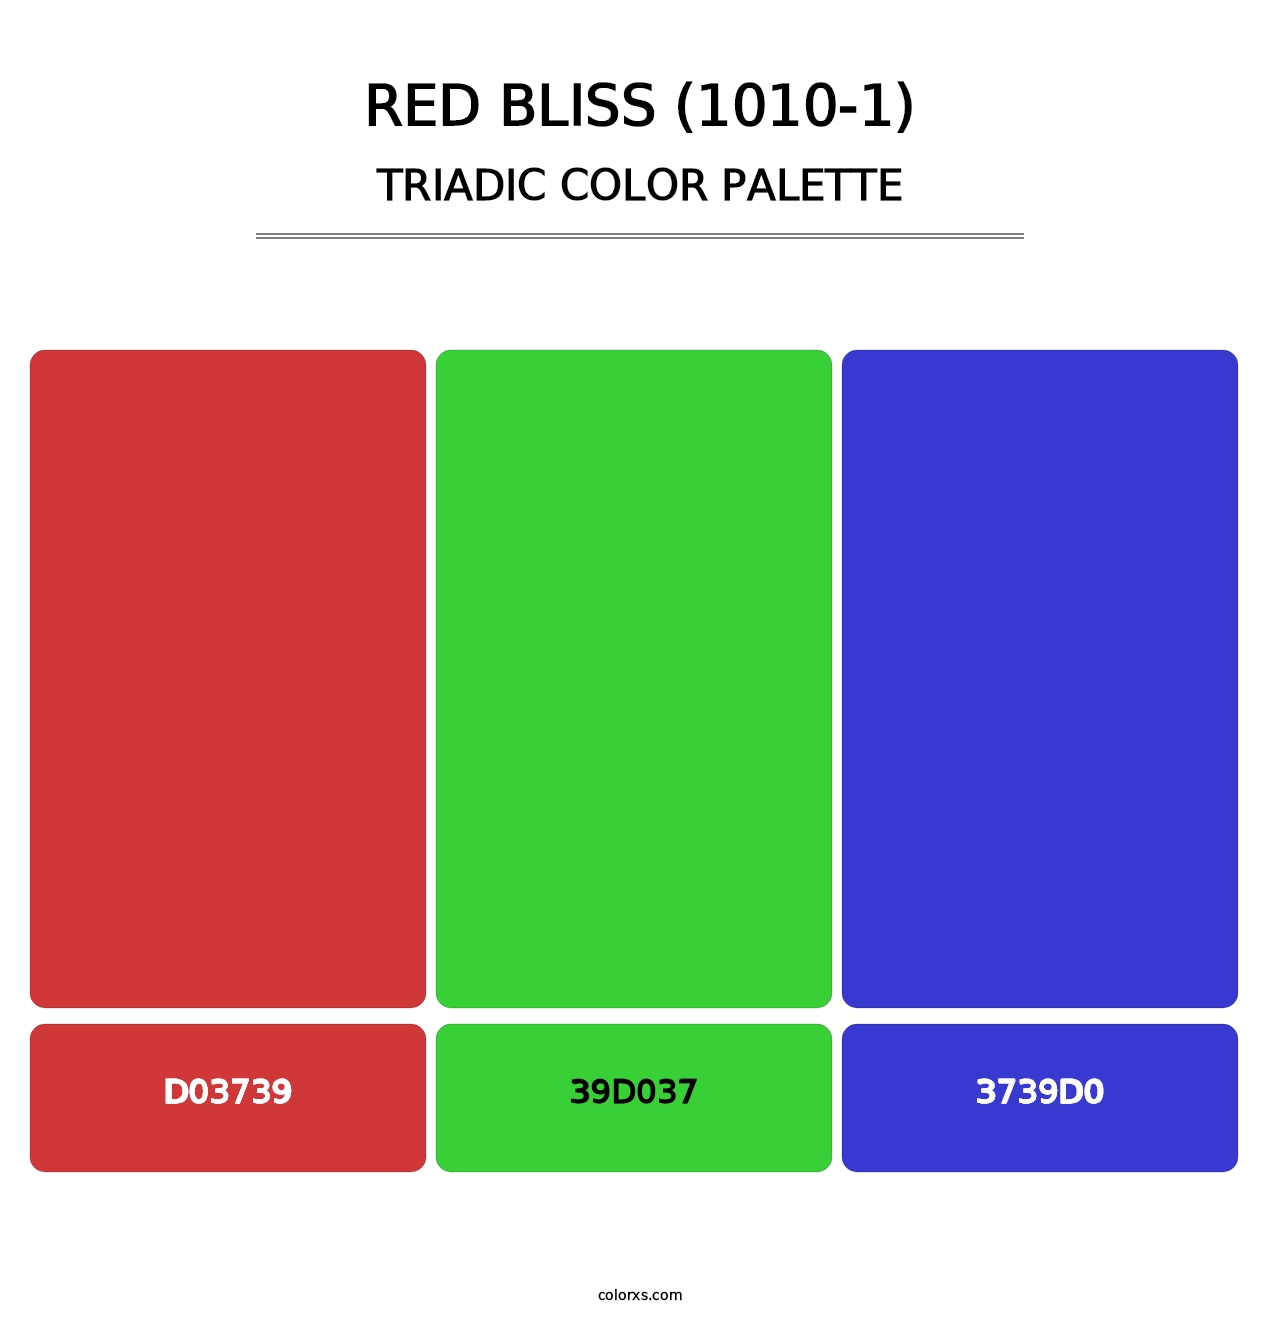 Red Bliss (1010-1) - Triadic Color Palette